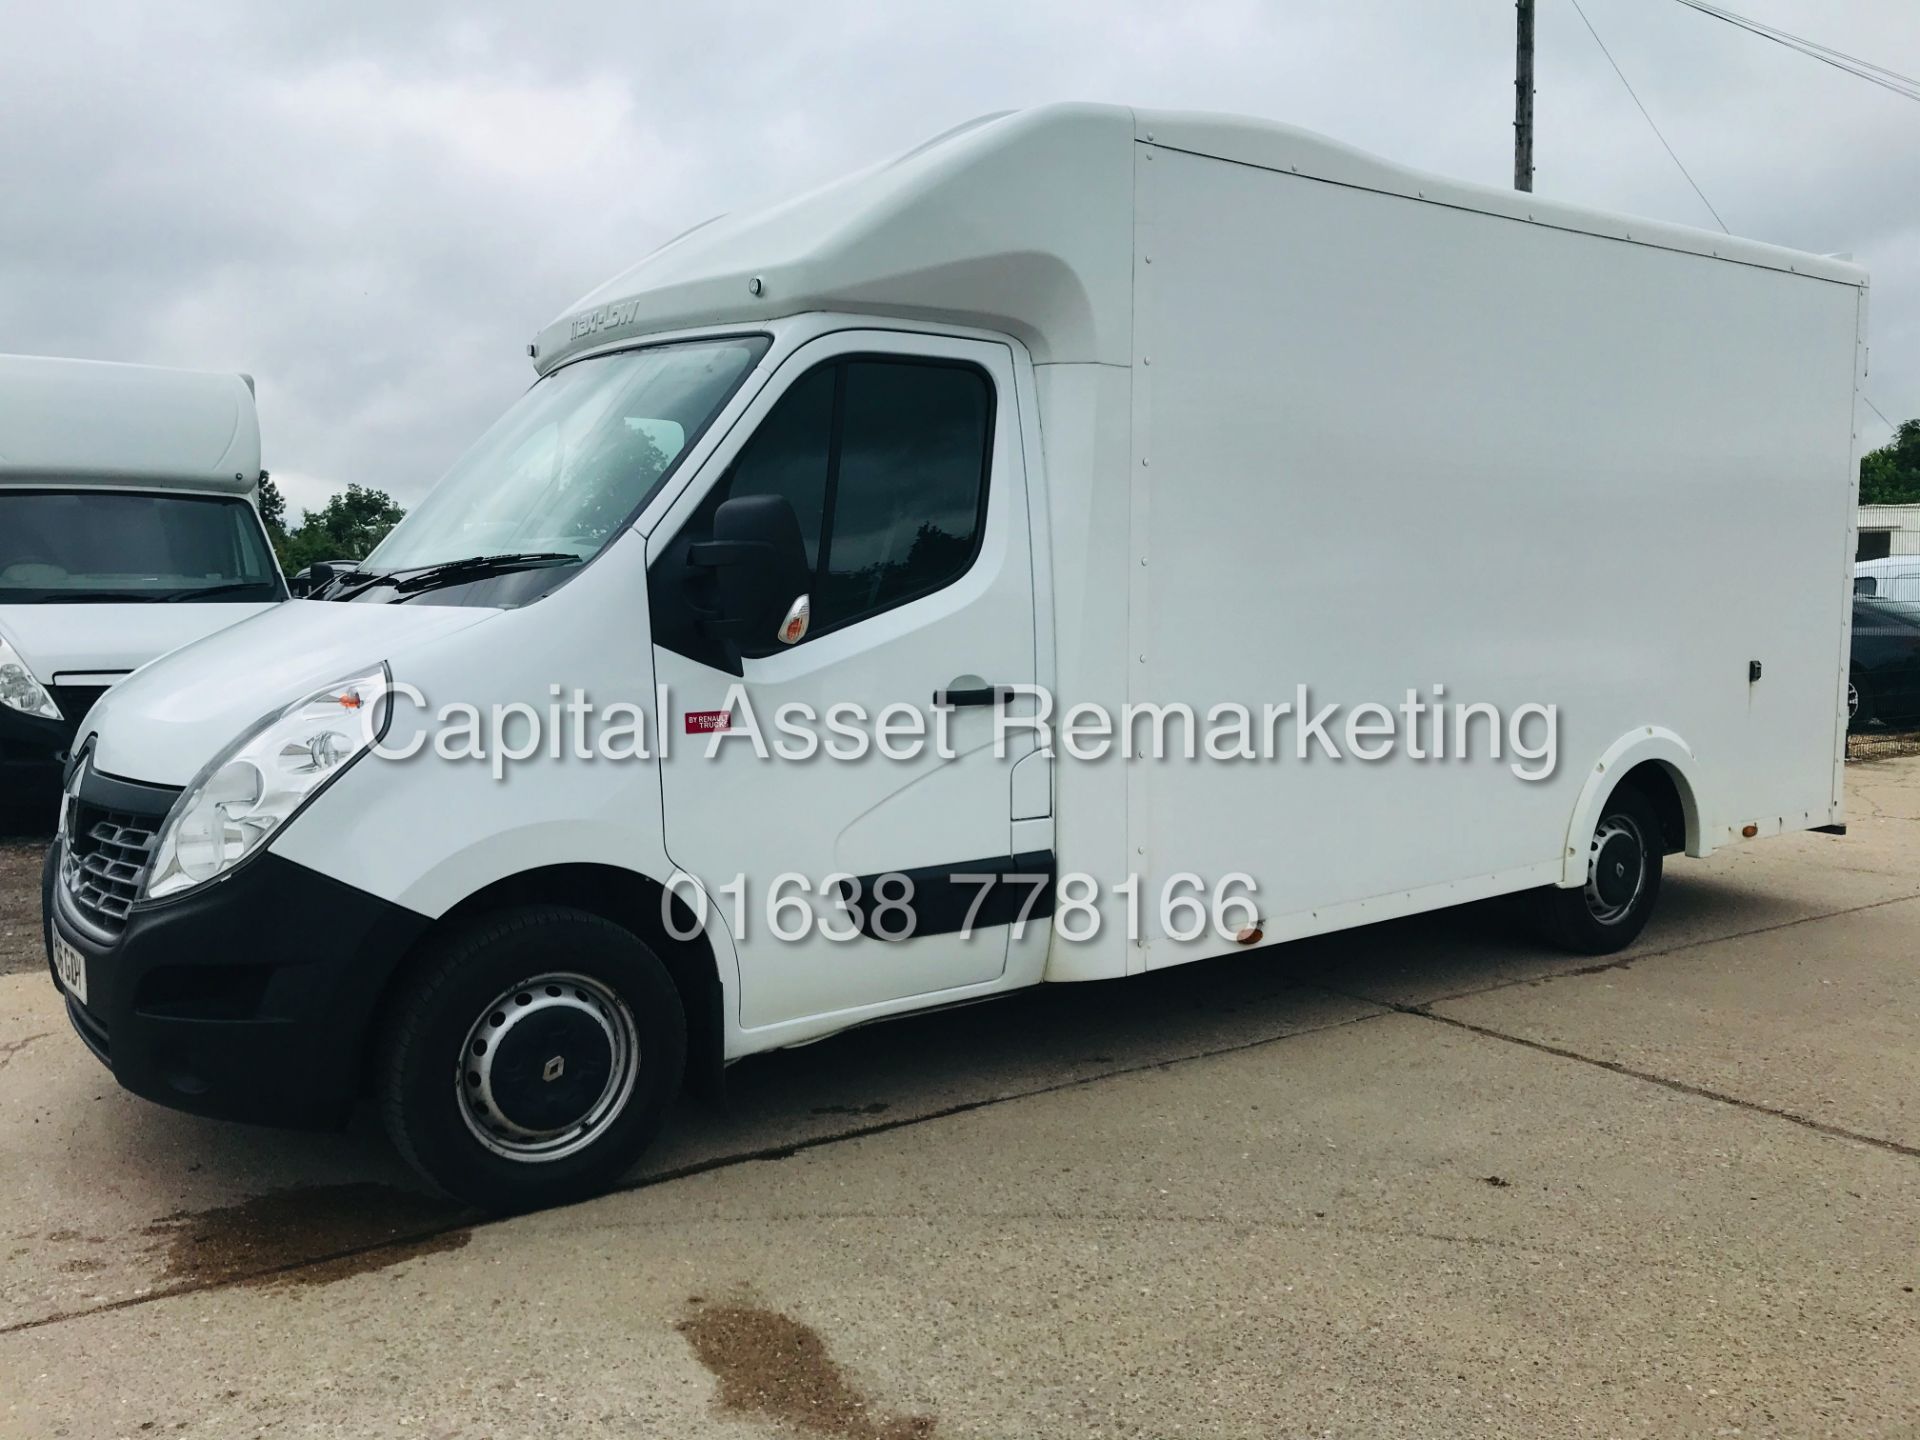 On Sale RENAULT MASTER 2.3DTI "LWB" MAXI-LOW LUTON (2017 REG) EURO 6 -1 OWNER BARN DOORS - AIR CON - Image 7 of 22